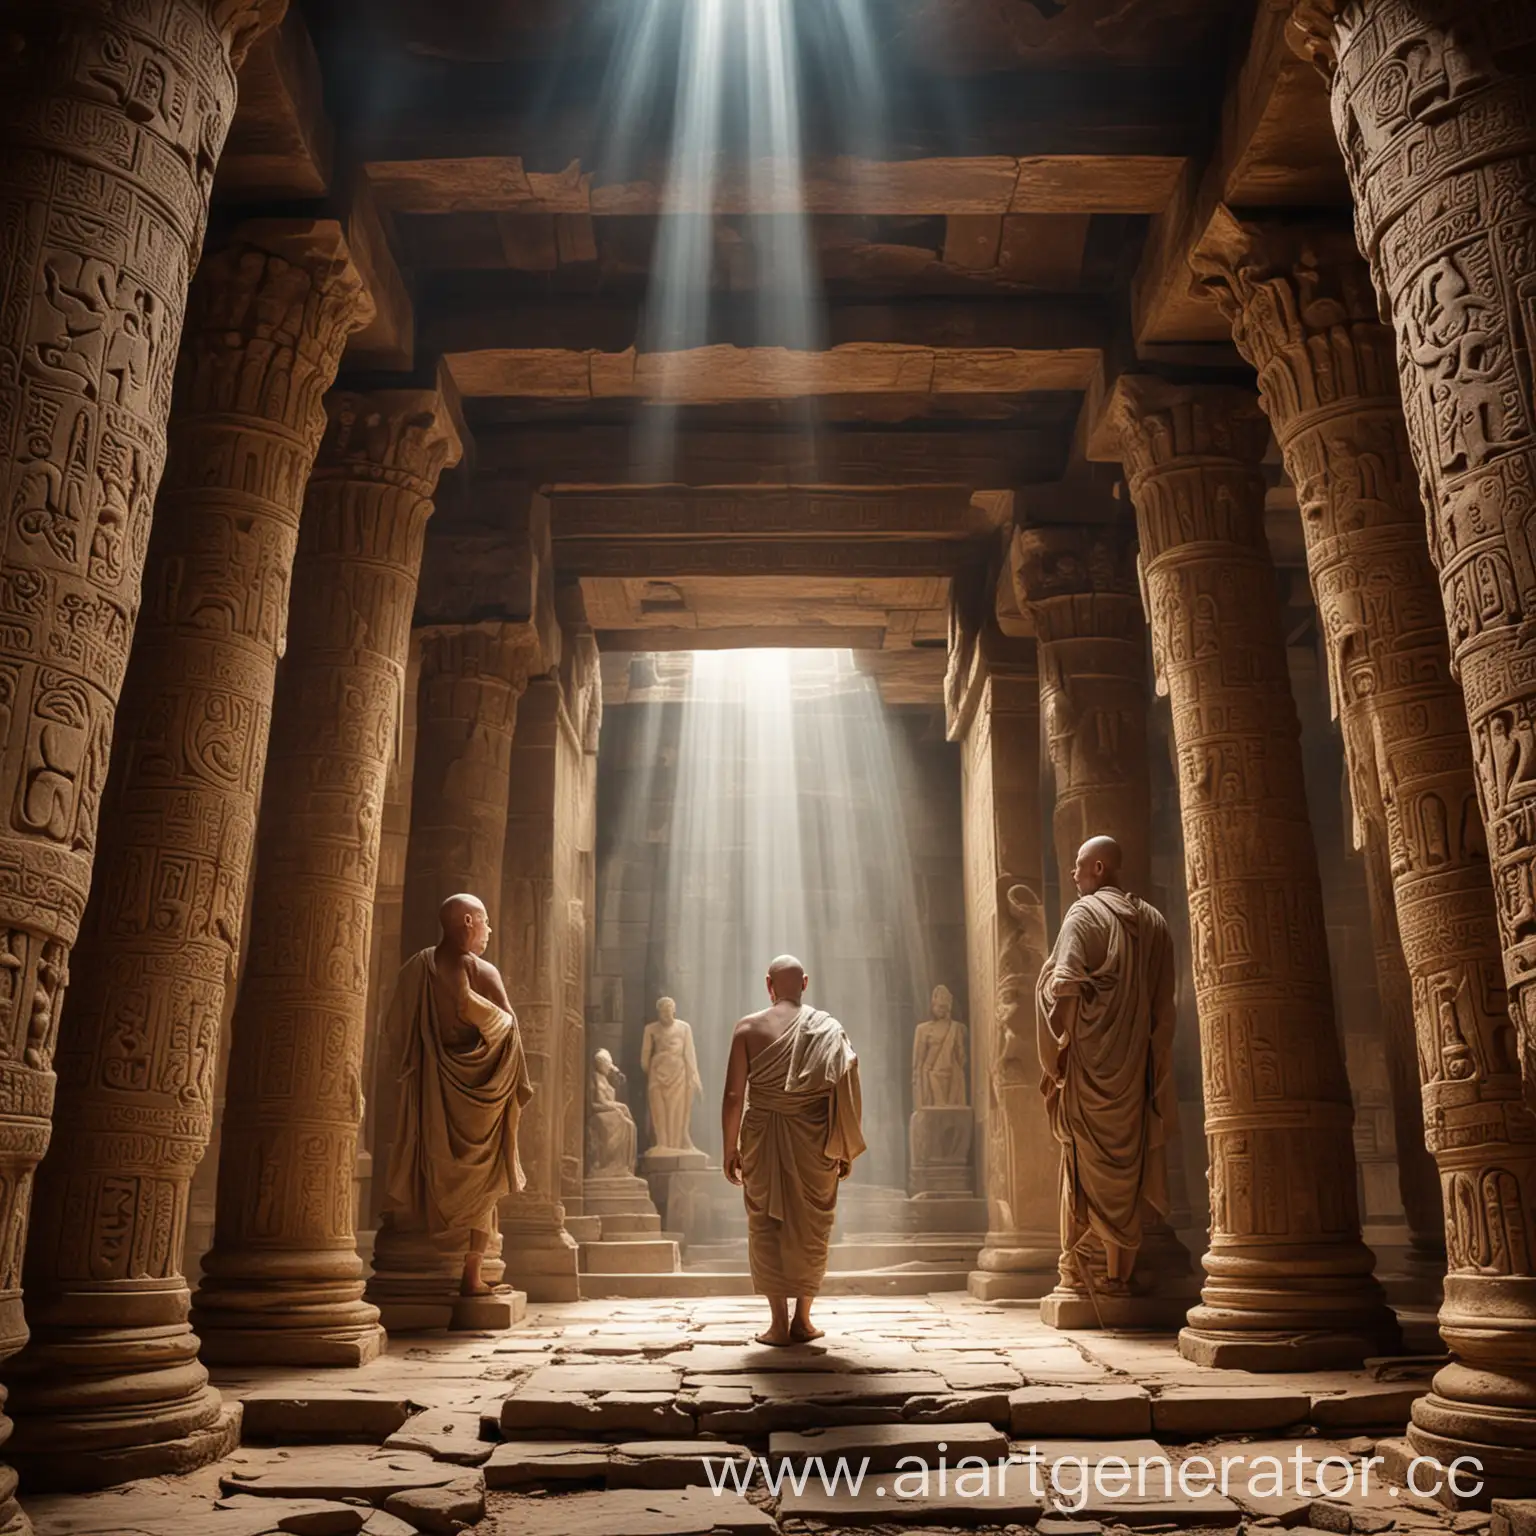 Ancient-Temple-with-Bald-Monks-and-Rays-of-Light